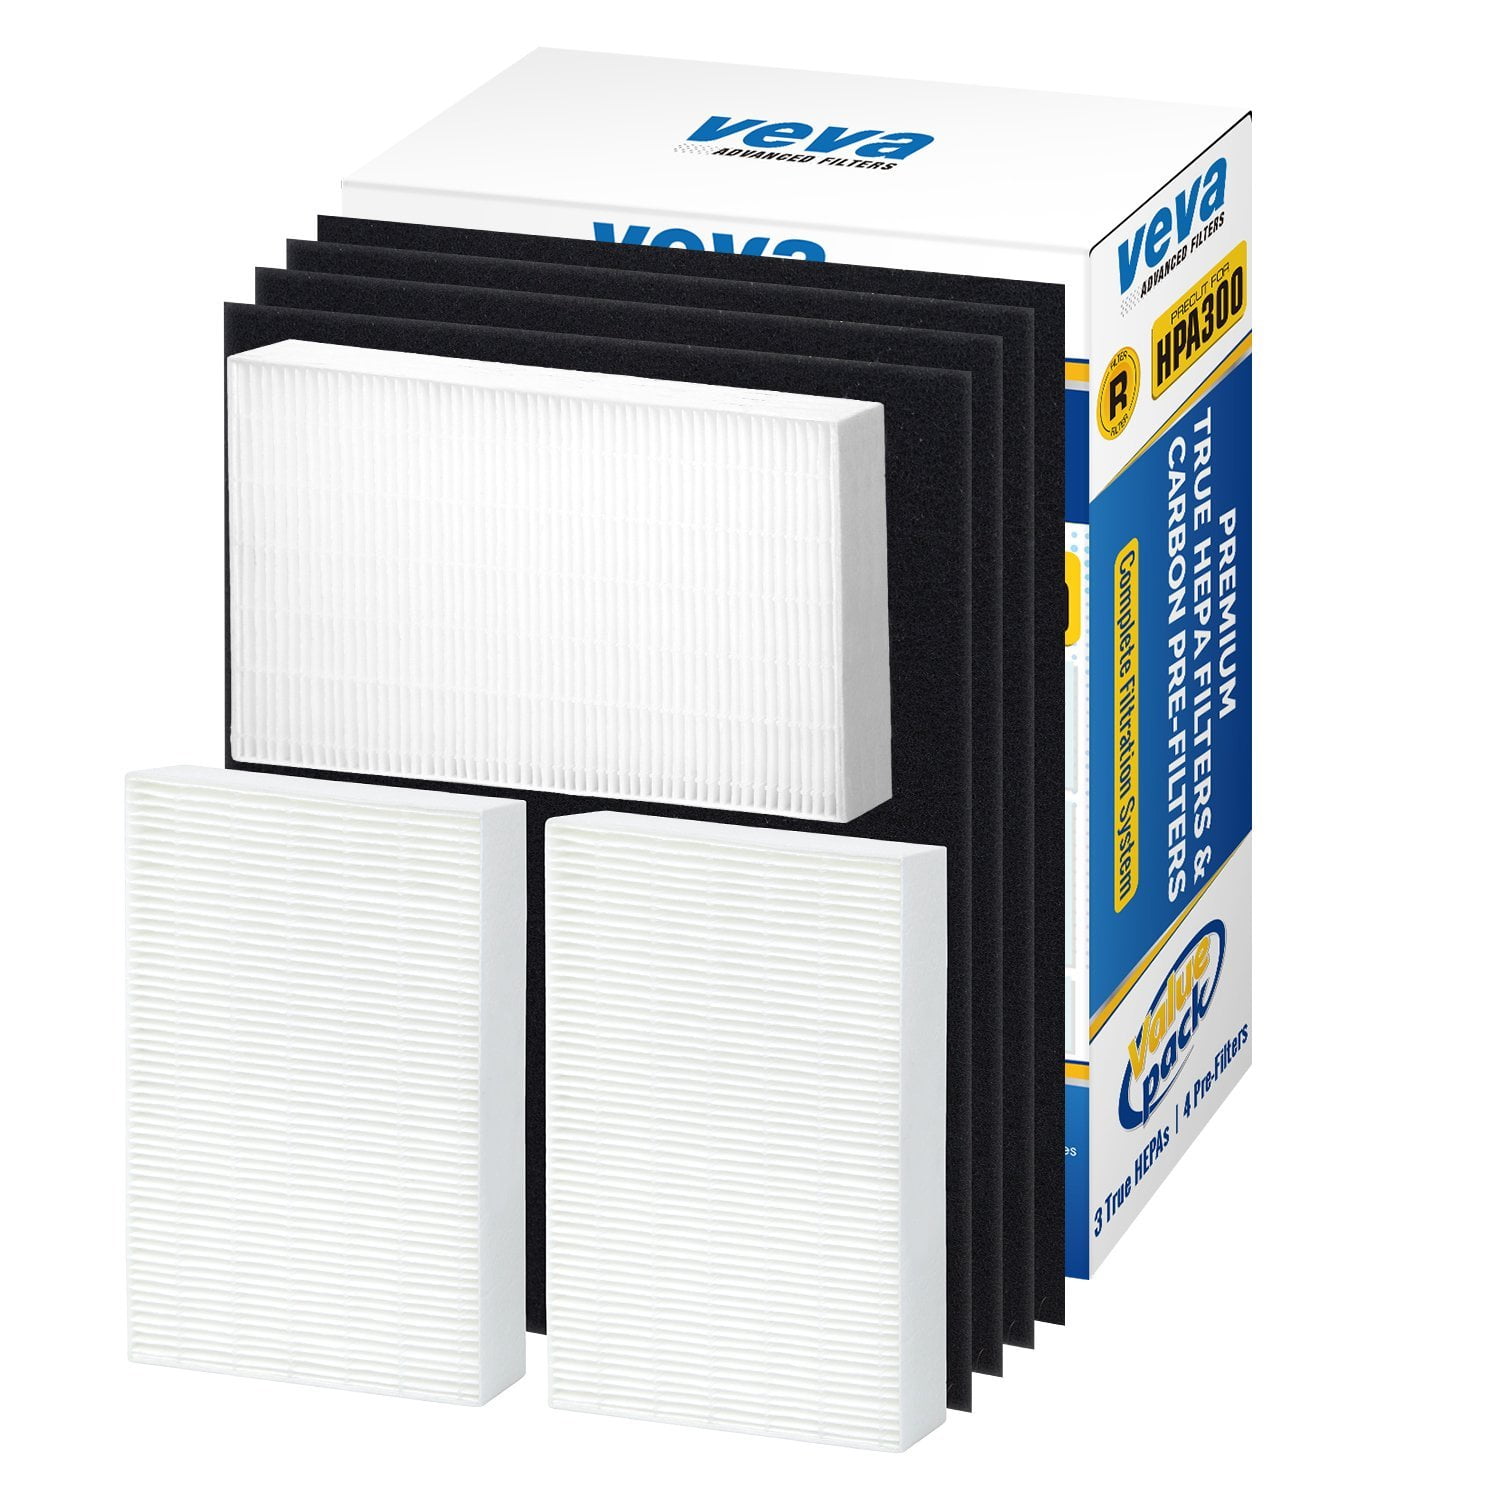 HPA300 Precut Carbon Pre Filters 6 Pack Compatible with Honeywell HPA3 